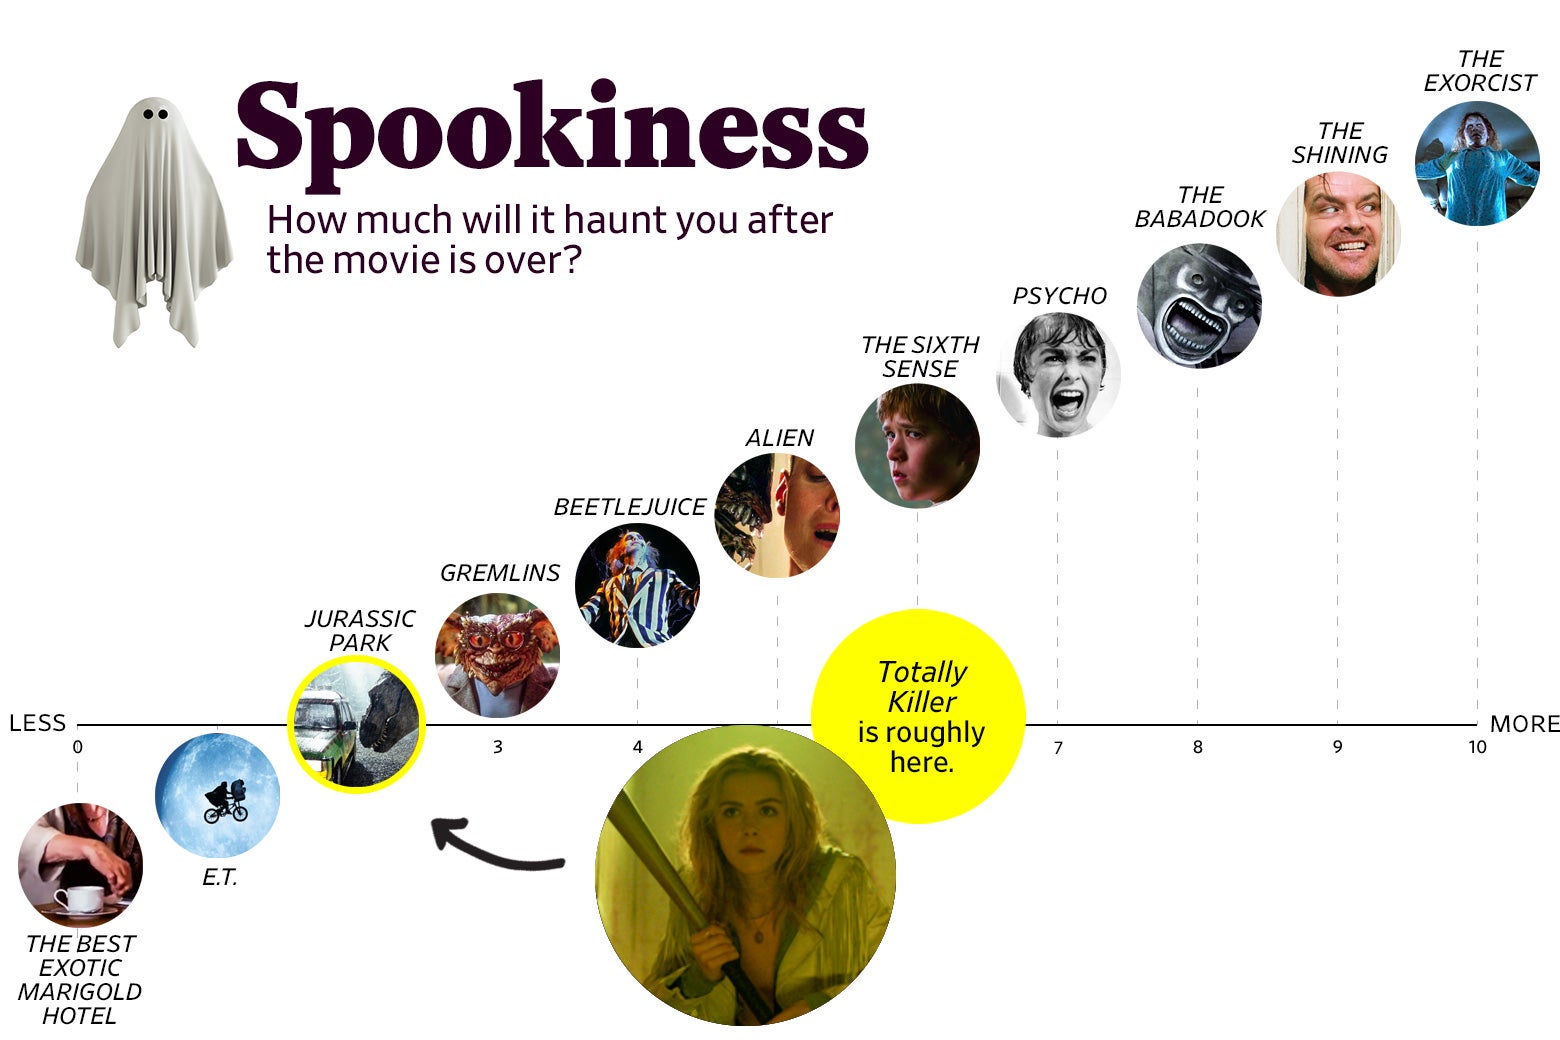 A chart titled “Spookiness: How much will it haunt you after the movie is over?” shows that Totally Killer ranks a 2 in spookiness, roughly the same as Jurassic Park. The scale ranges from The Best Exotic Marigold Hotel (0) to The Exorcist (10).